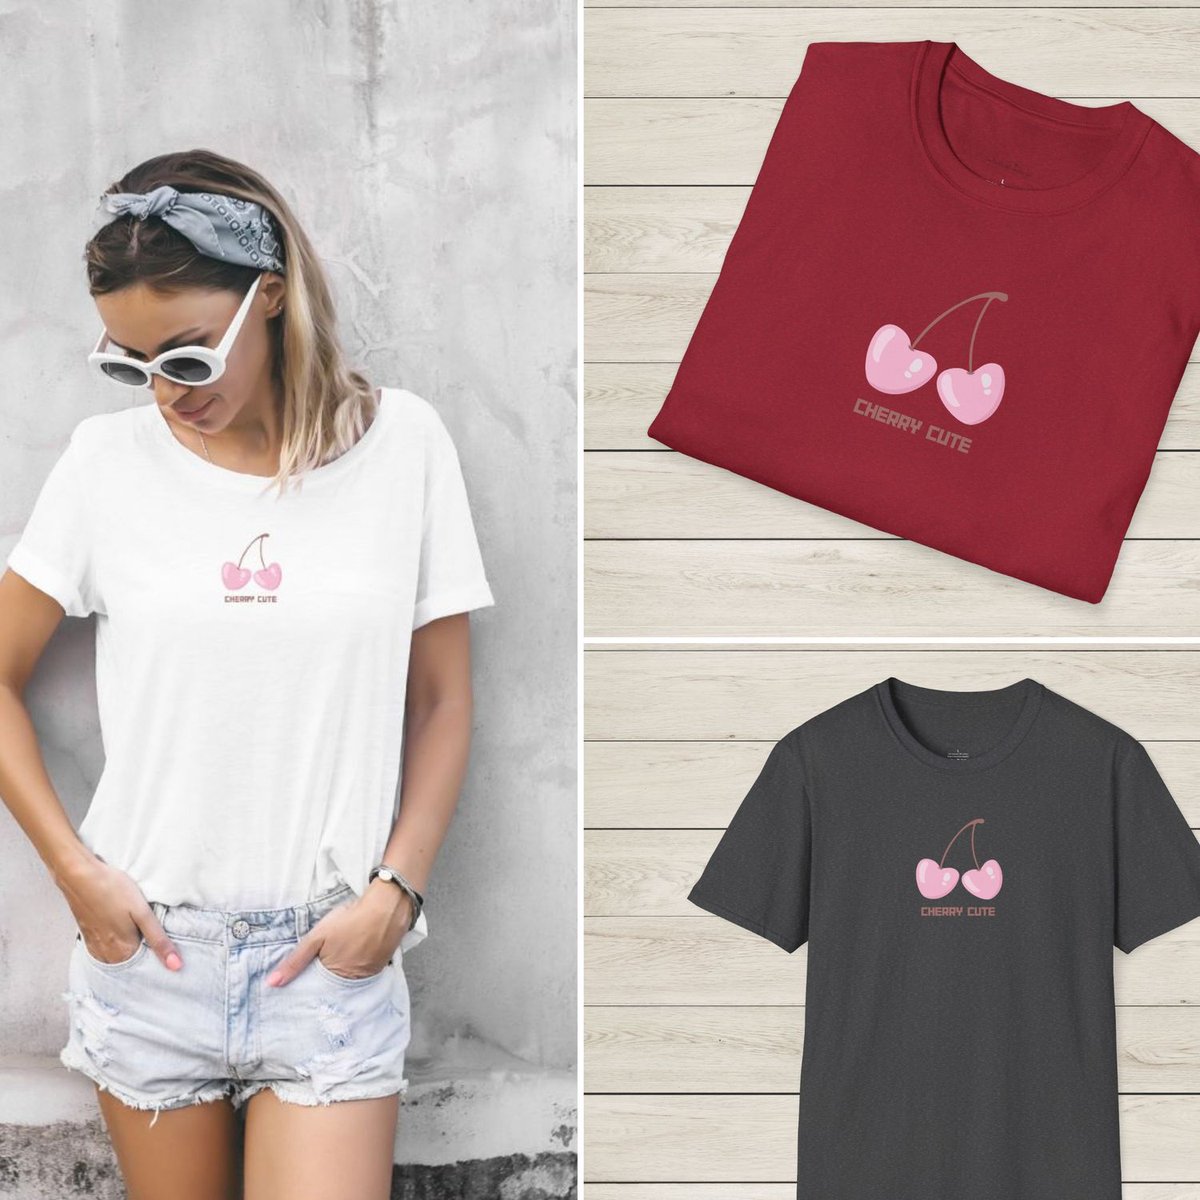 #MHHSBD 𝘾𝙝𝙚𝙧𝙧𝙮 𝘾𝙪𝙩𝙚 This cute cherry Tshirt is fun for summer and the cool cotton with help you feel fresh. buff.ly/3V8bJiF